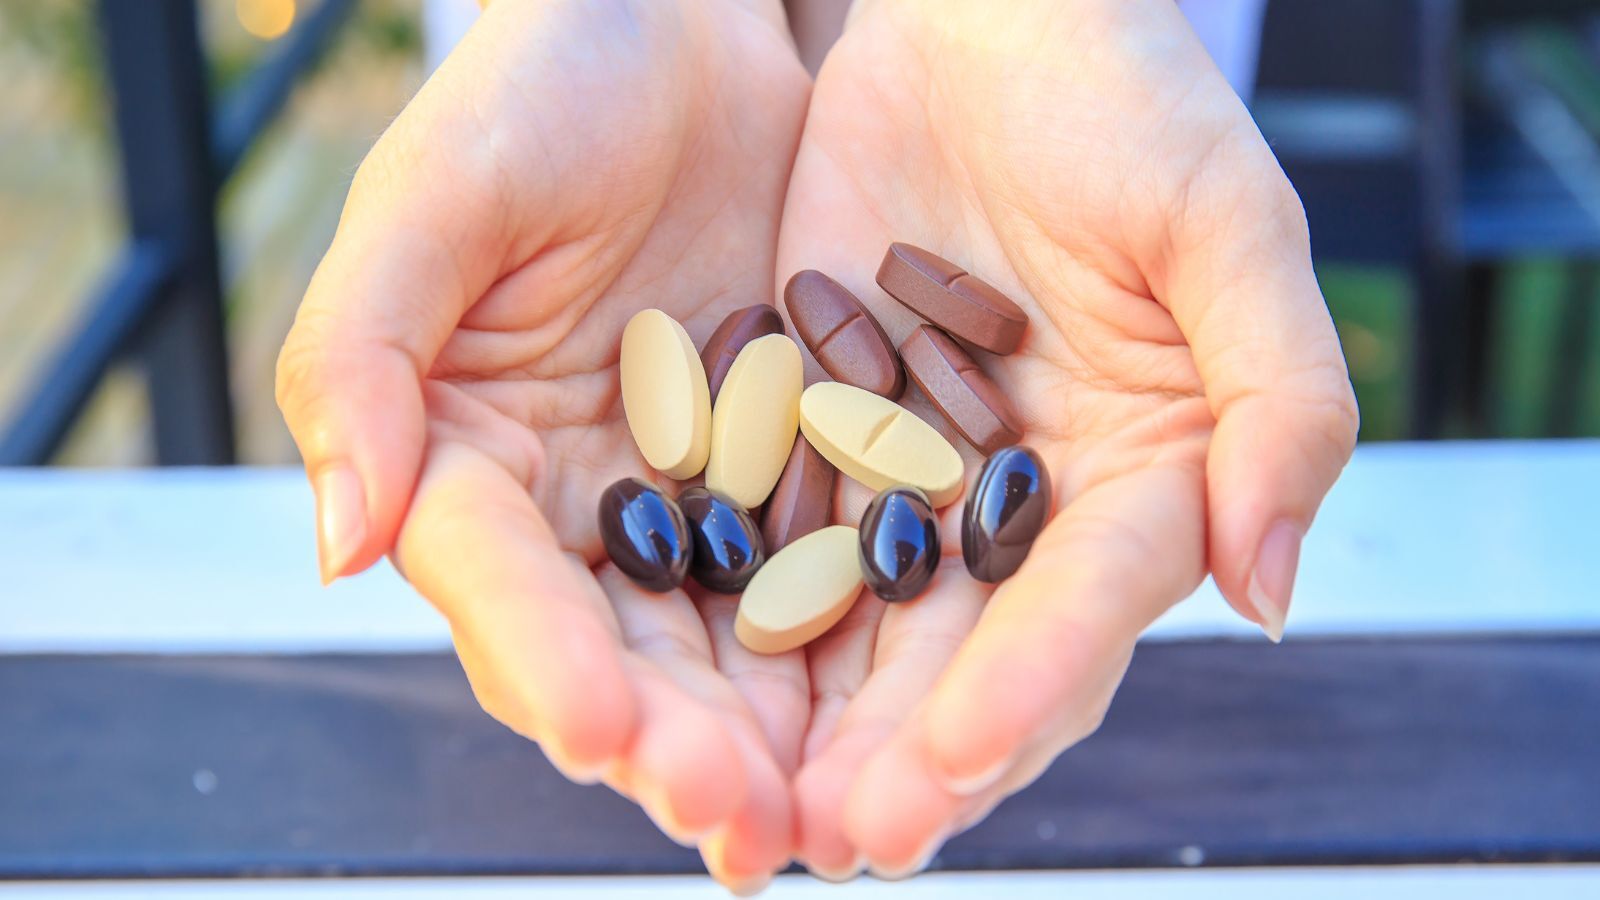 12 Best Wholefood Multivitamin Brands for Your Health